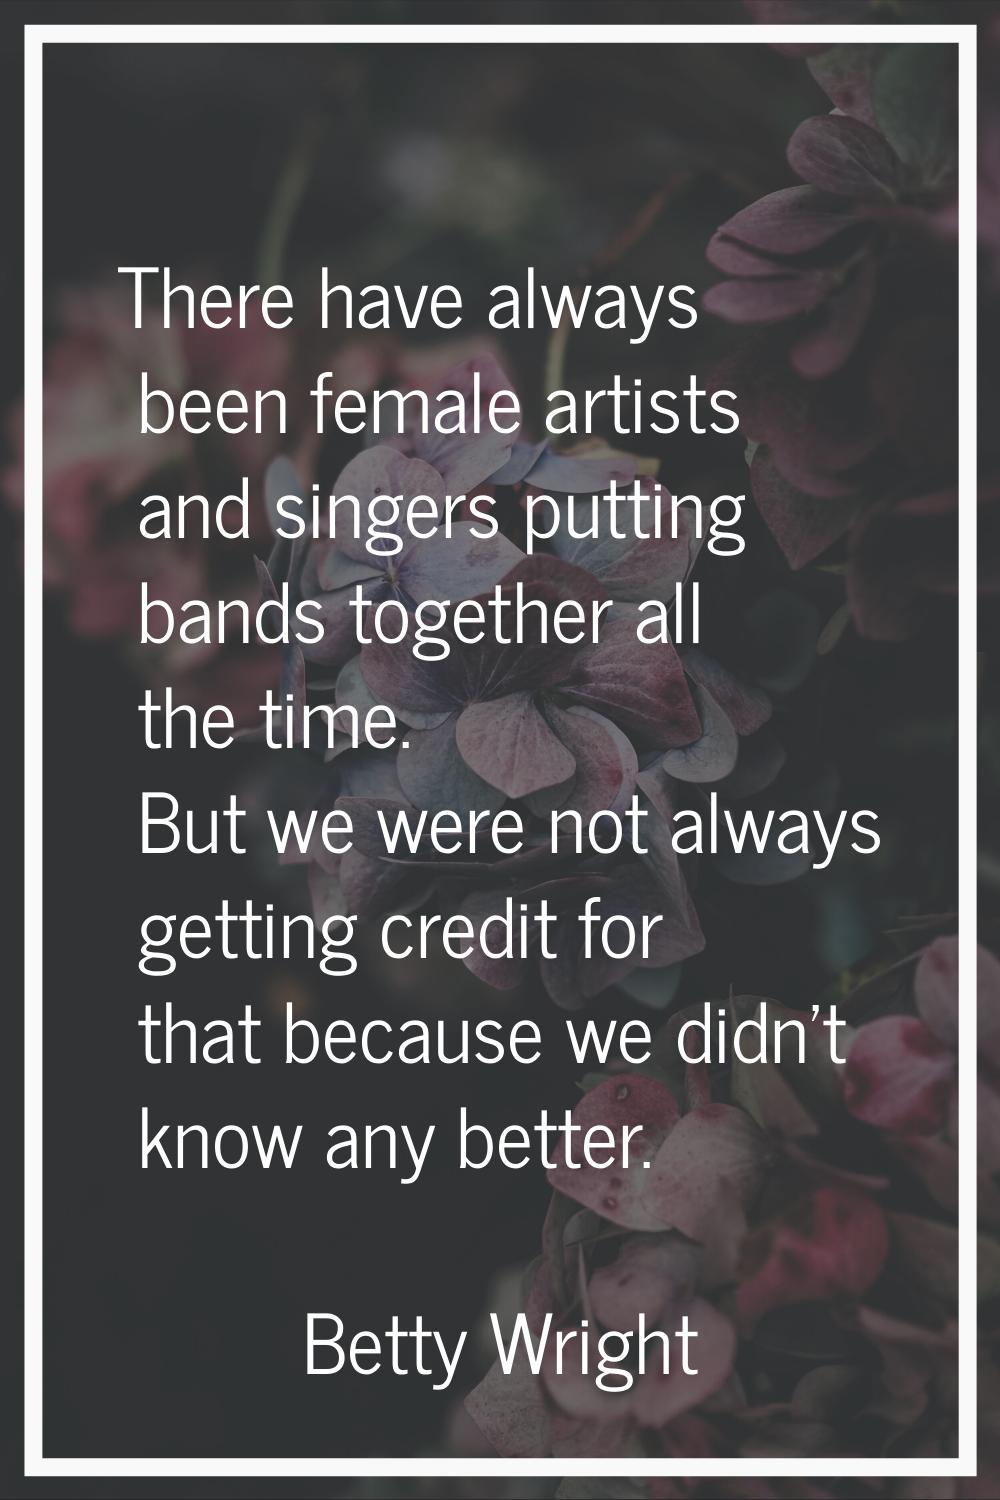 There have always been female artists and singers putting bands together all the time. But we were 